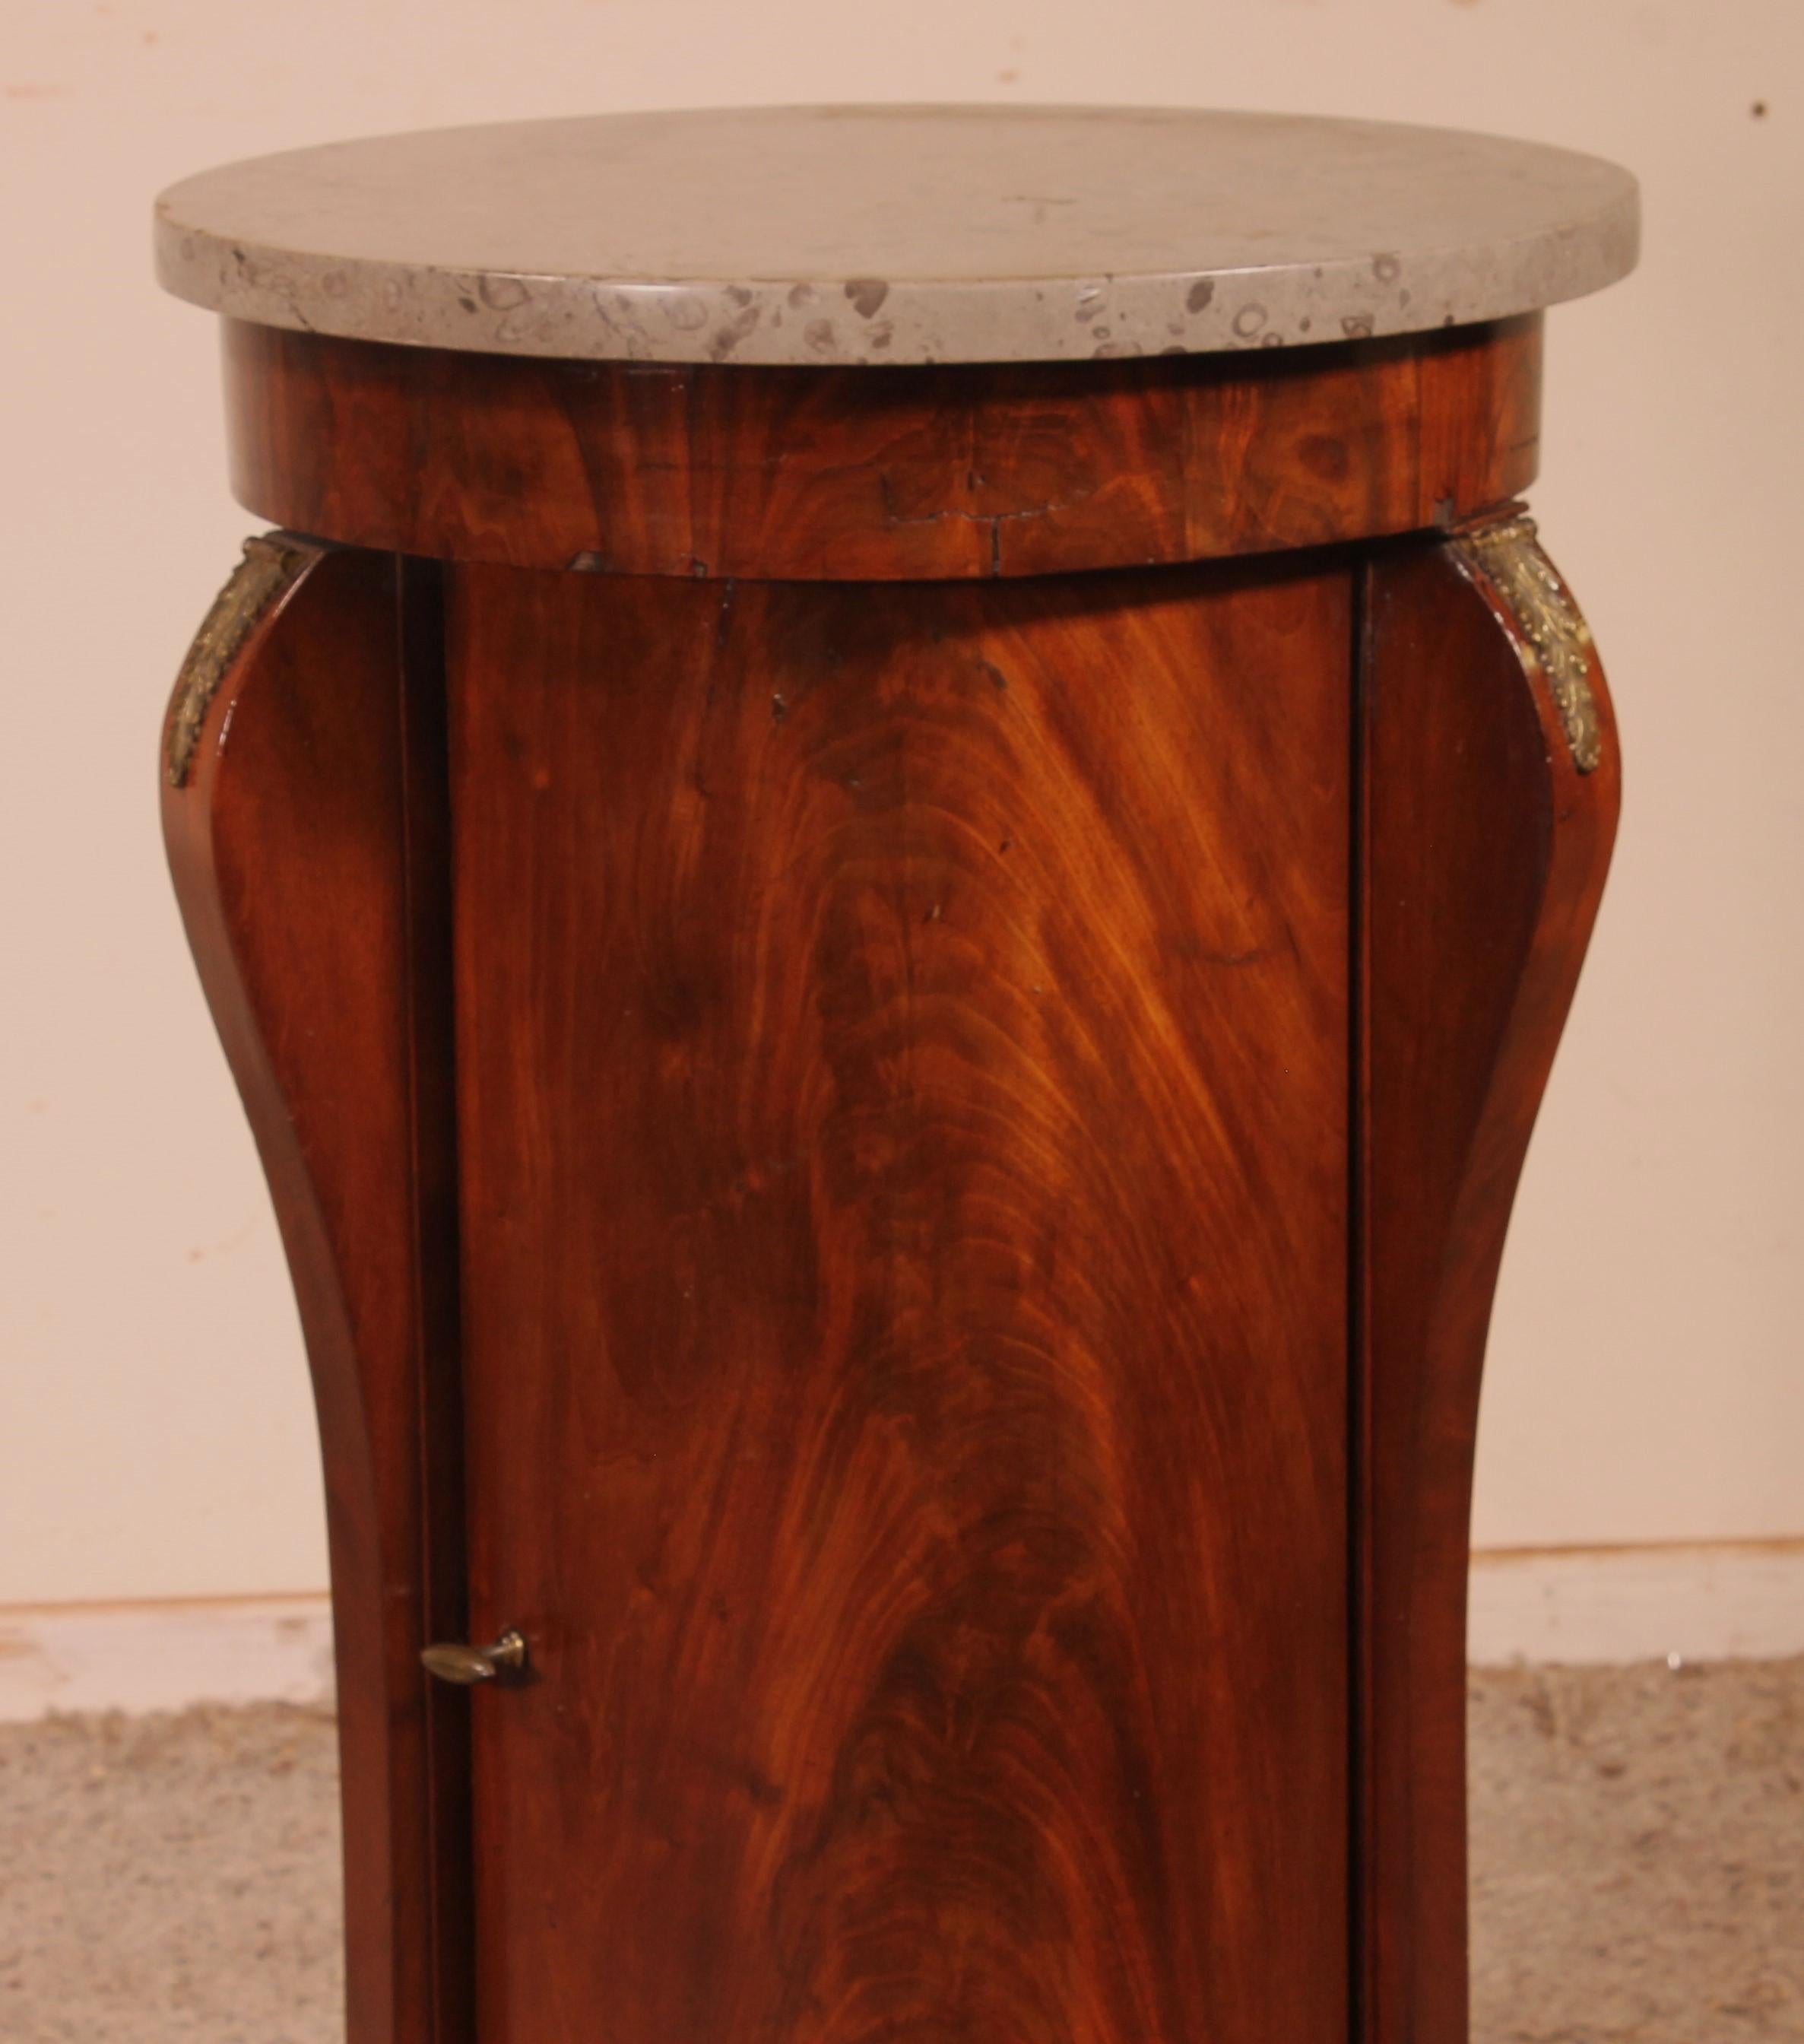 Rare important Somno from the Empire period entirely in Mahogany veneer from Cuba and featuring a gray marble
It is unusual to find a somno of this size since it is larger than the average. In addition it has three branches decorated with